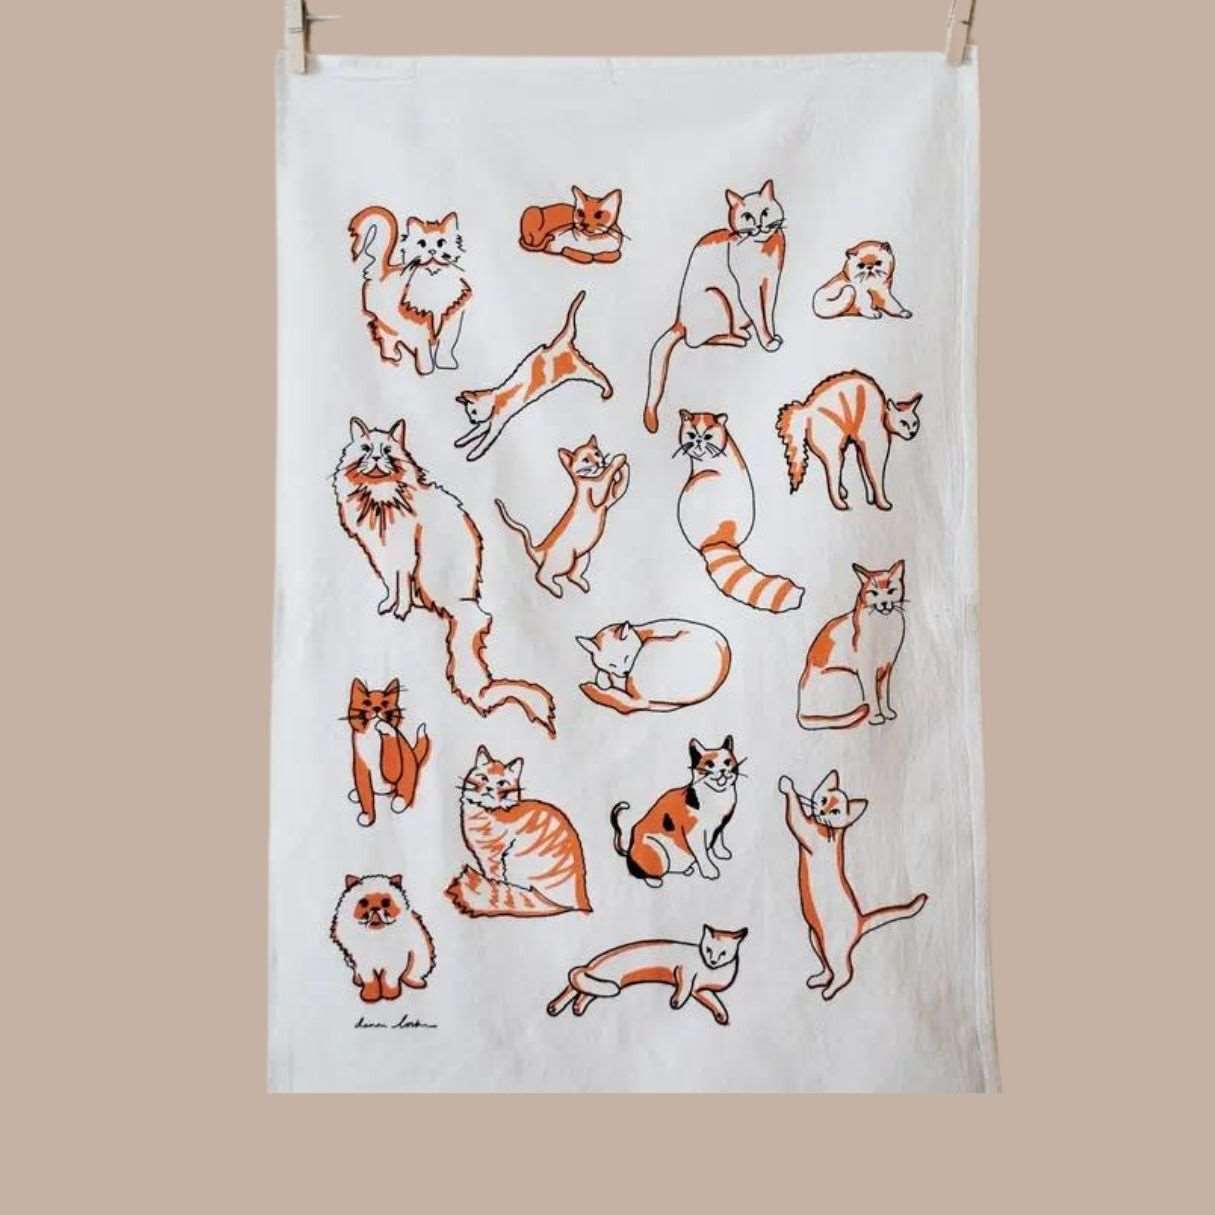 Cats Tea Towel - Dani Locke - Box Builder Item - KINSHIP GIFT - Cats, dani locke, housewarming, housewarming gift, LDT:GW:RESTRICT, Pets - Pittsburgh - gift - boxes - gift - baskets - corporate - gifts - holiday - gifts